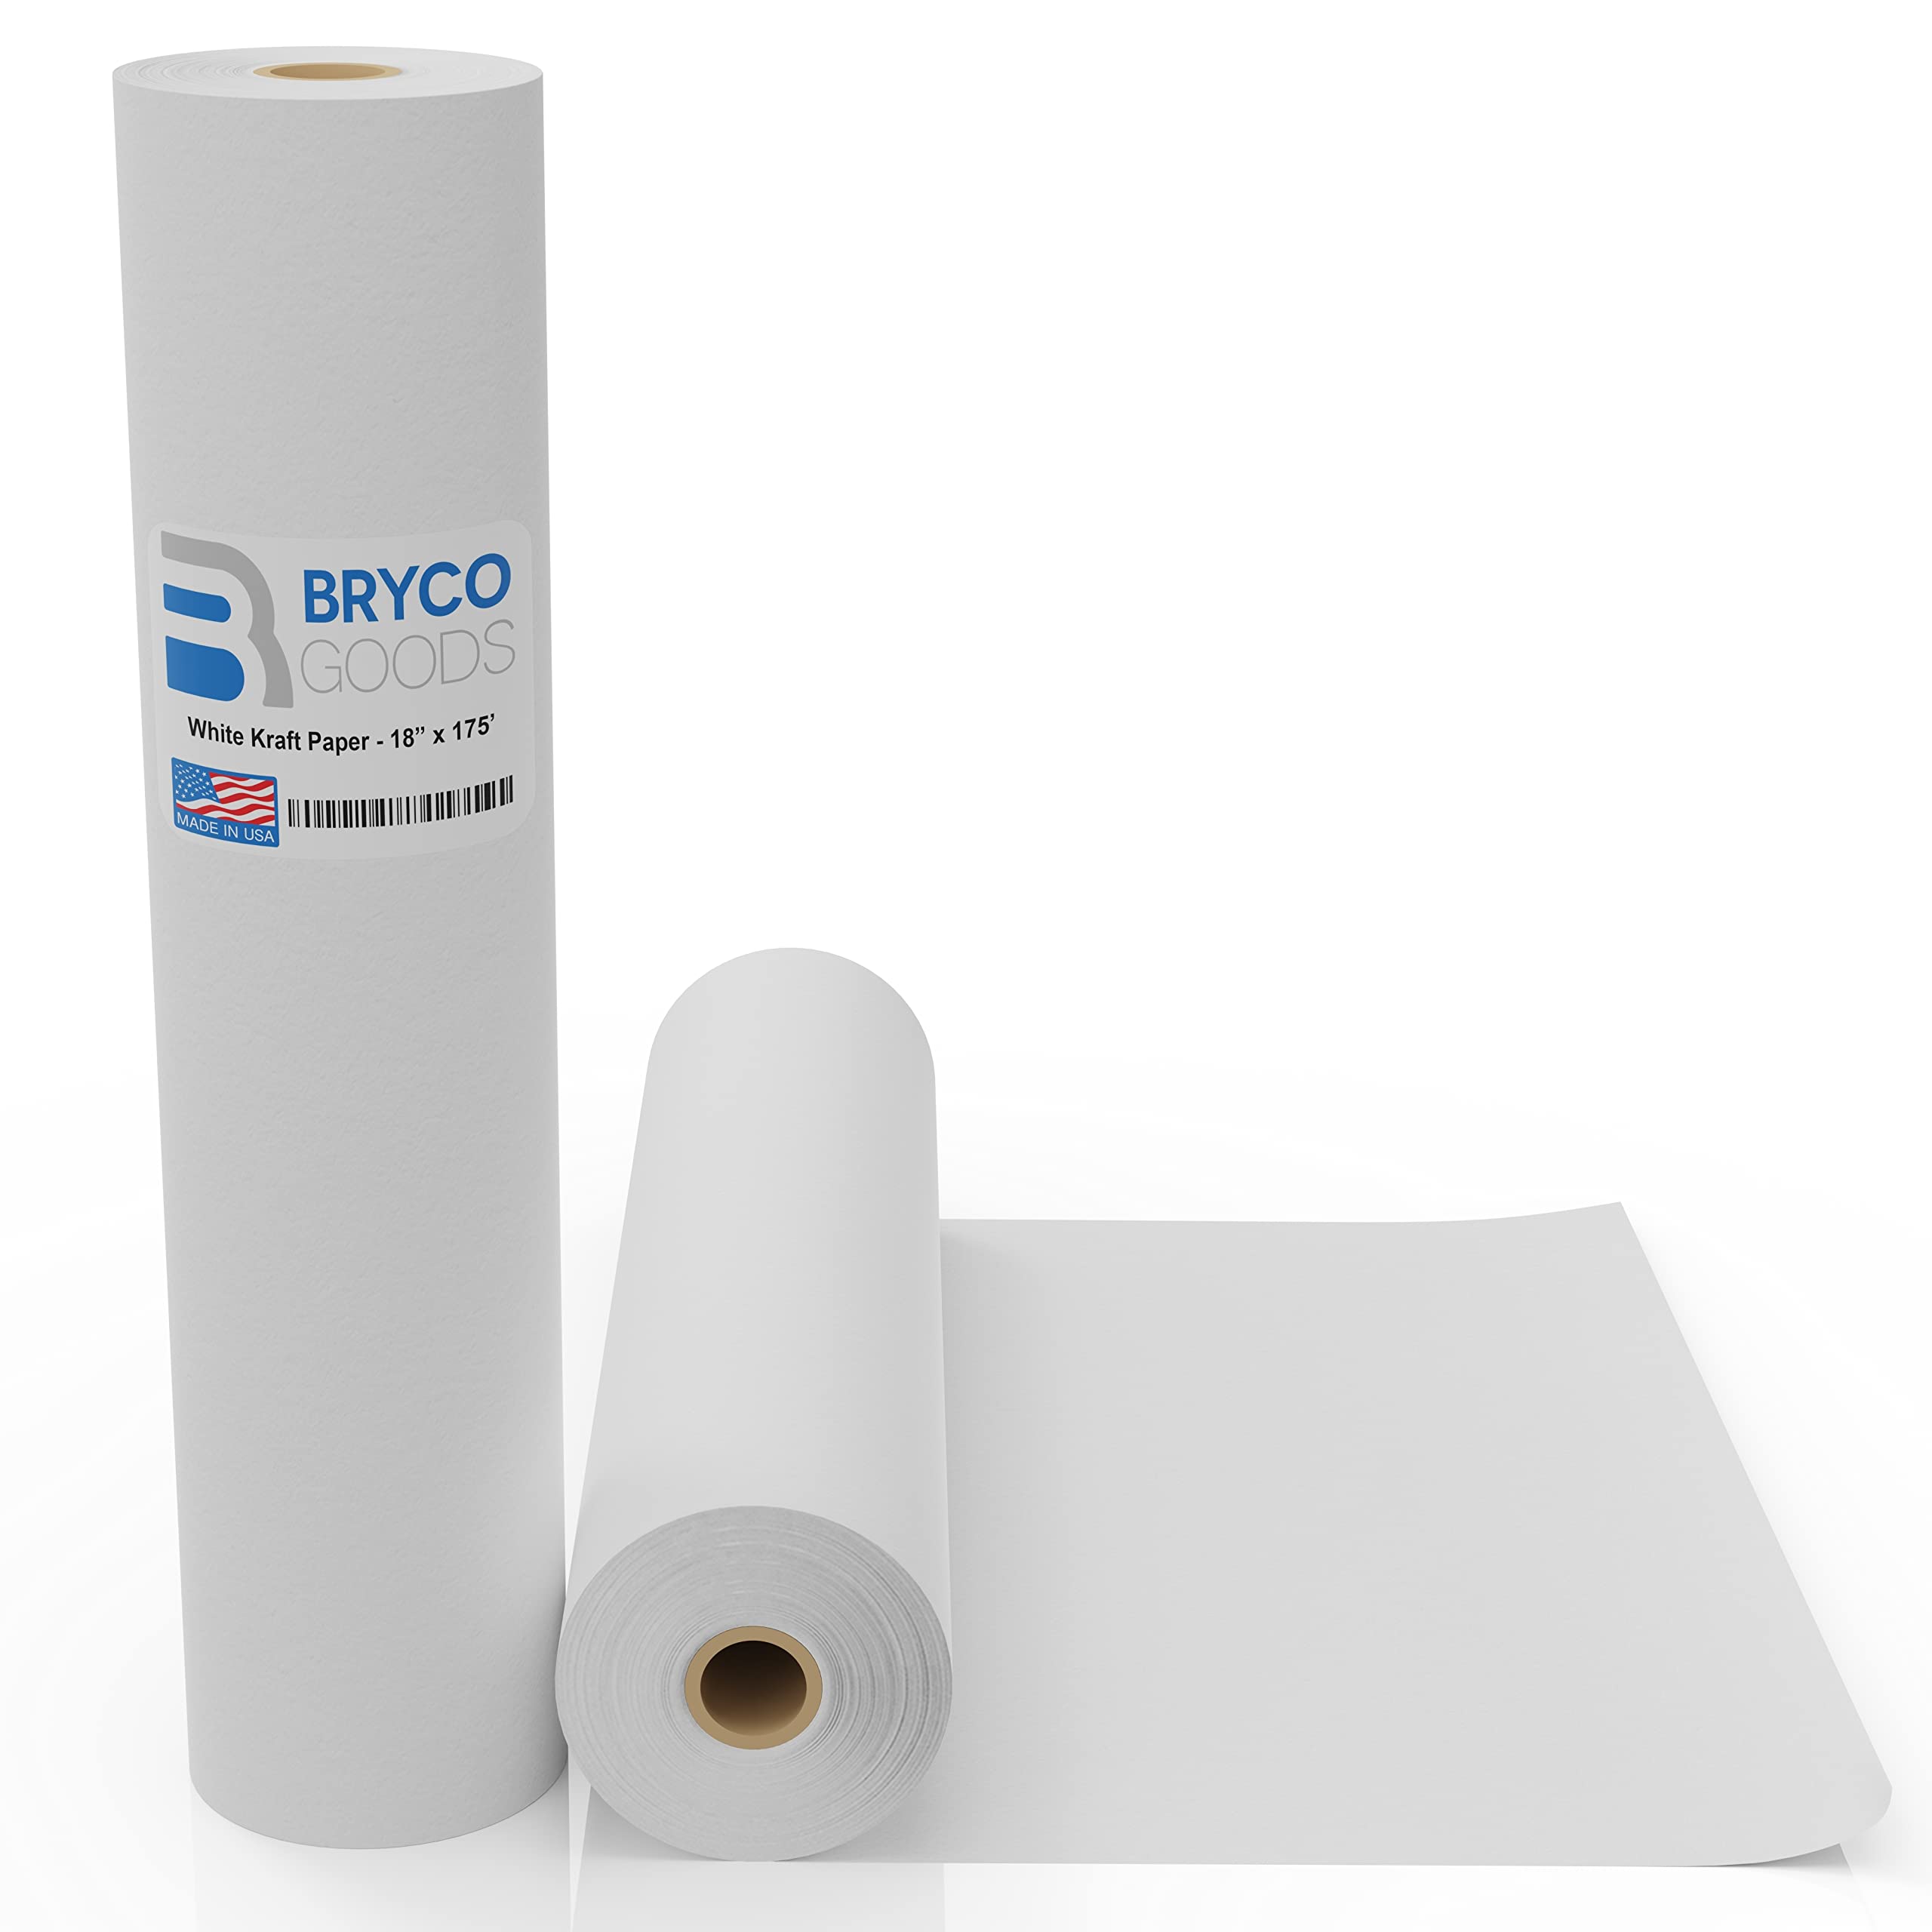 Bryco White Kraft Arts and Crafts Paper Roll - 18 inches by 100 Feet (1200  Inch) - Ideal for Paints, Wall Art, Easel Paper, Gift Wrapping Paper and